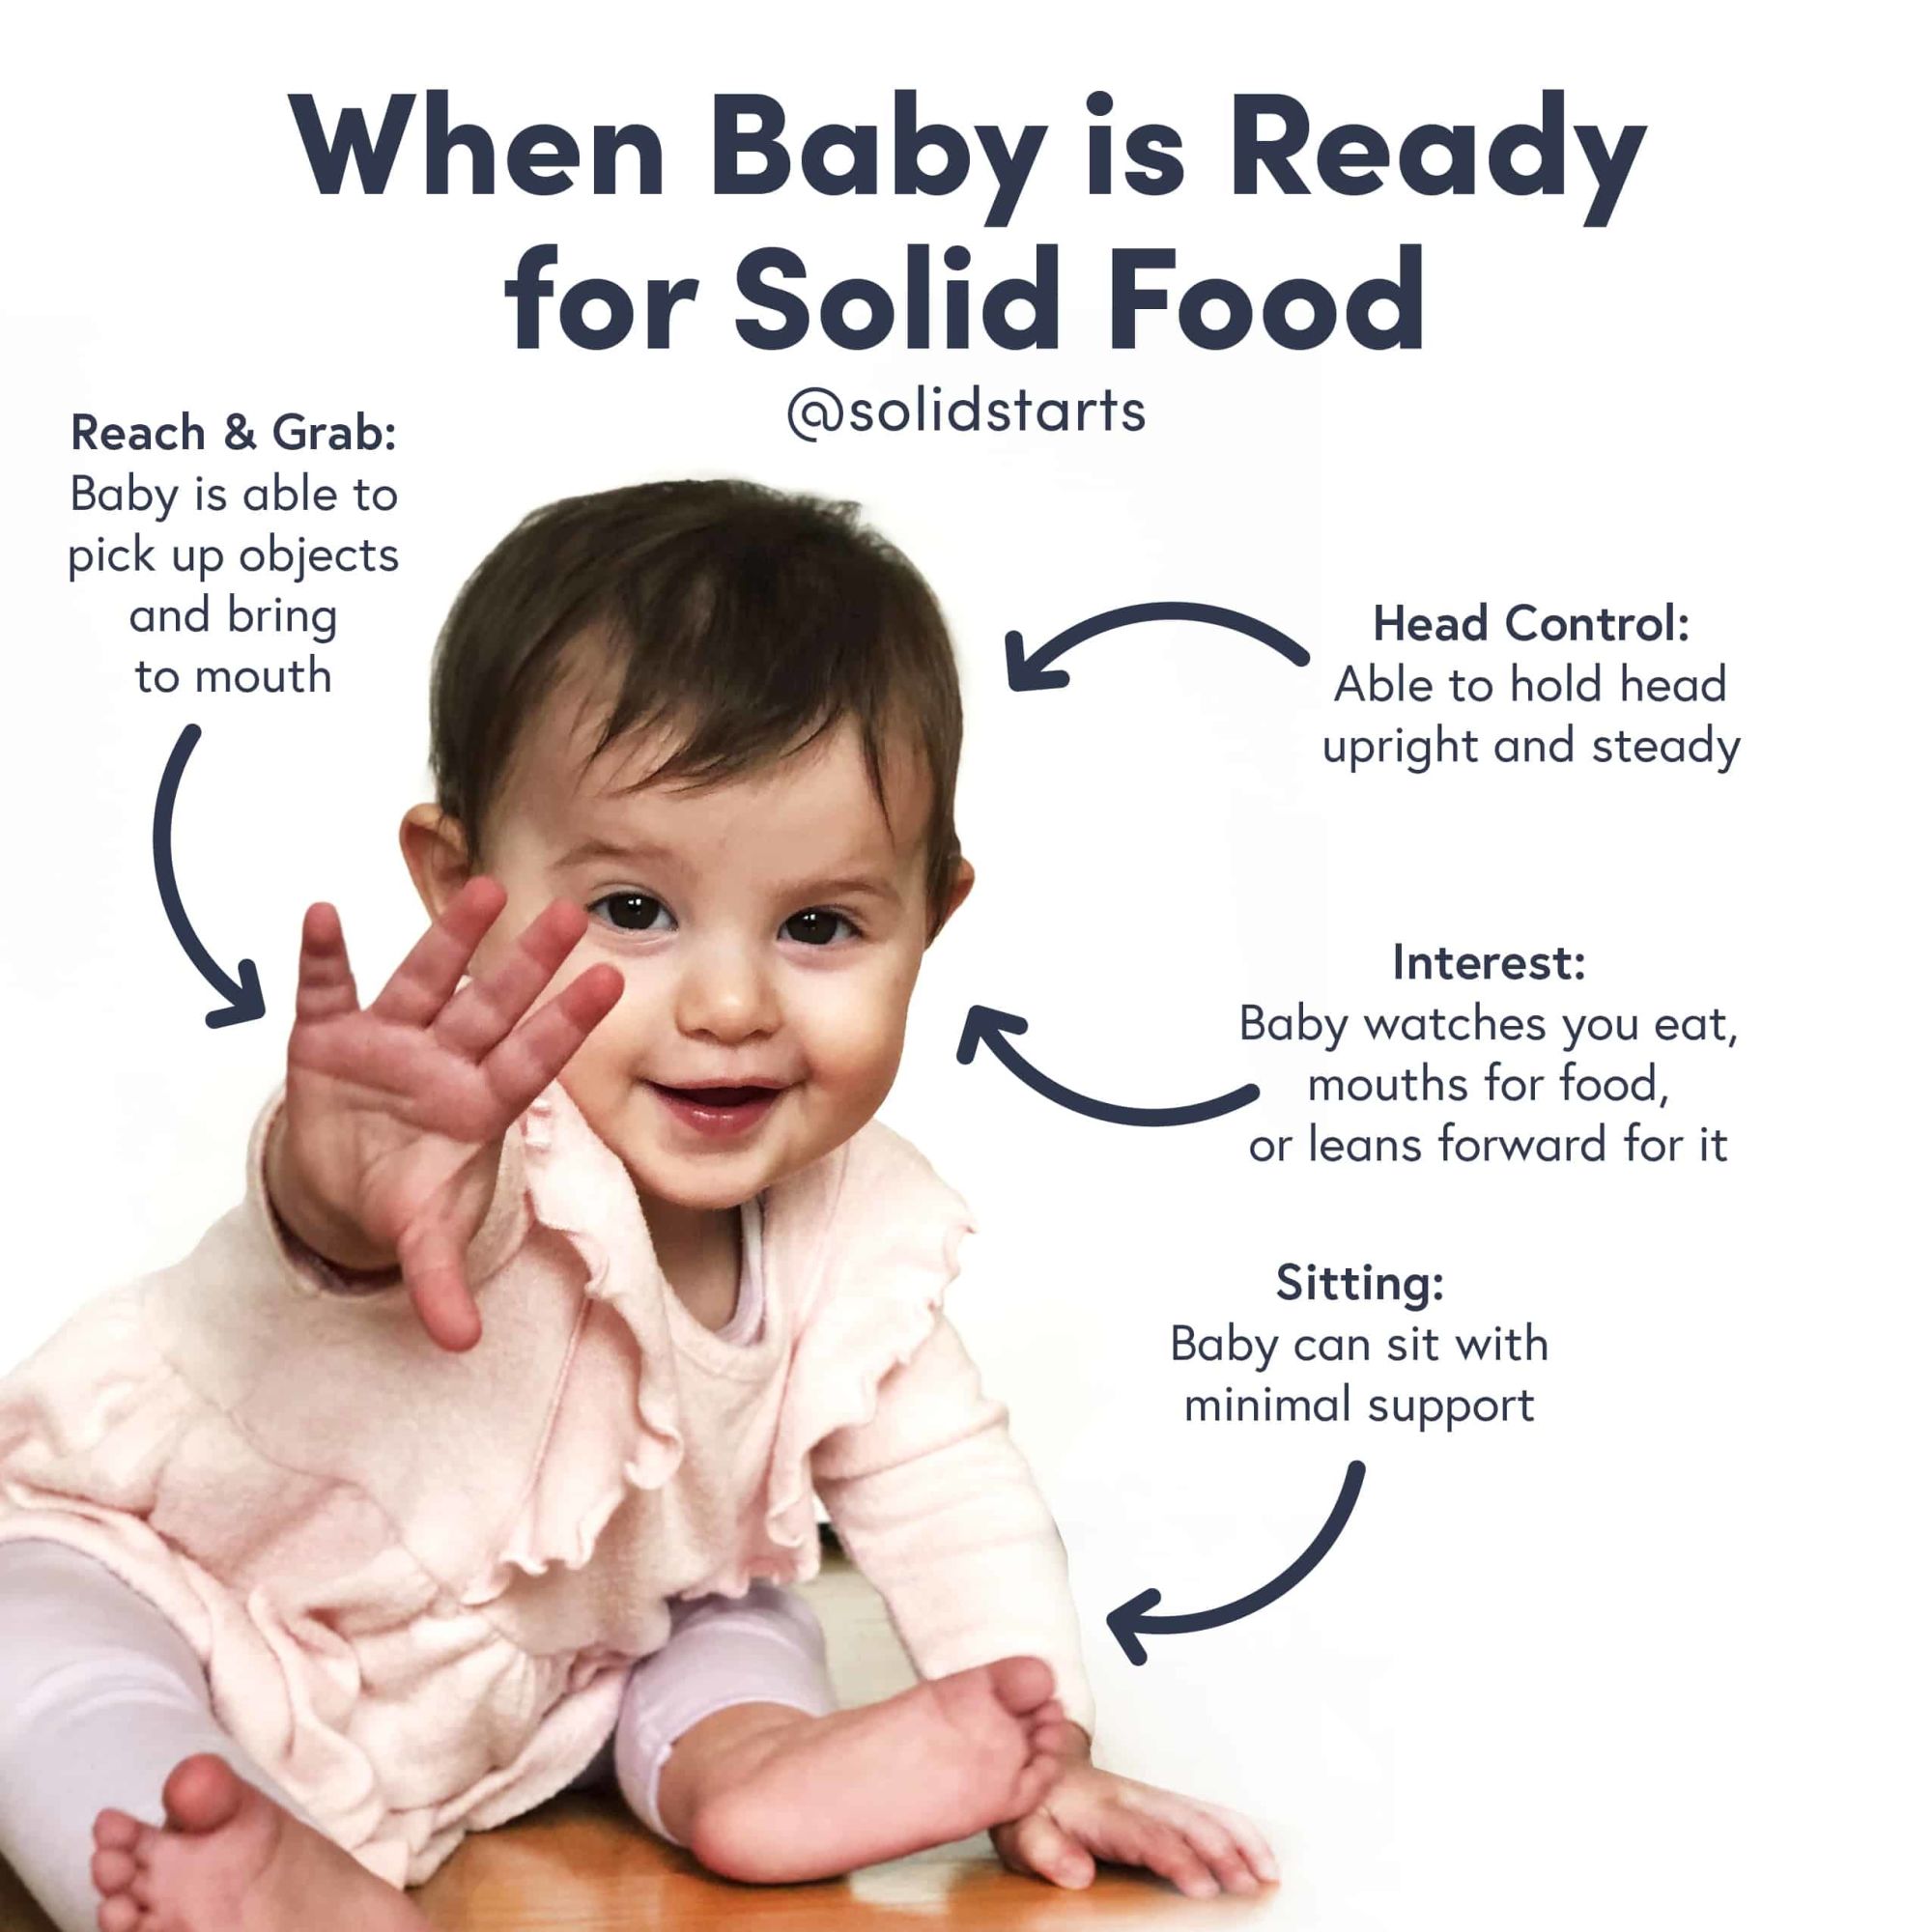 ⚡️Solid readiness of your baby depends on coming signs ✔️ Shows interest in  food ✔️Can sit up alone or with support ✔️ Is able to control…